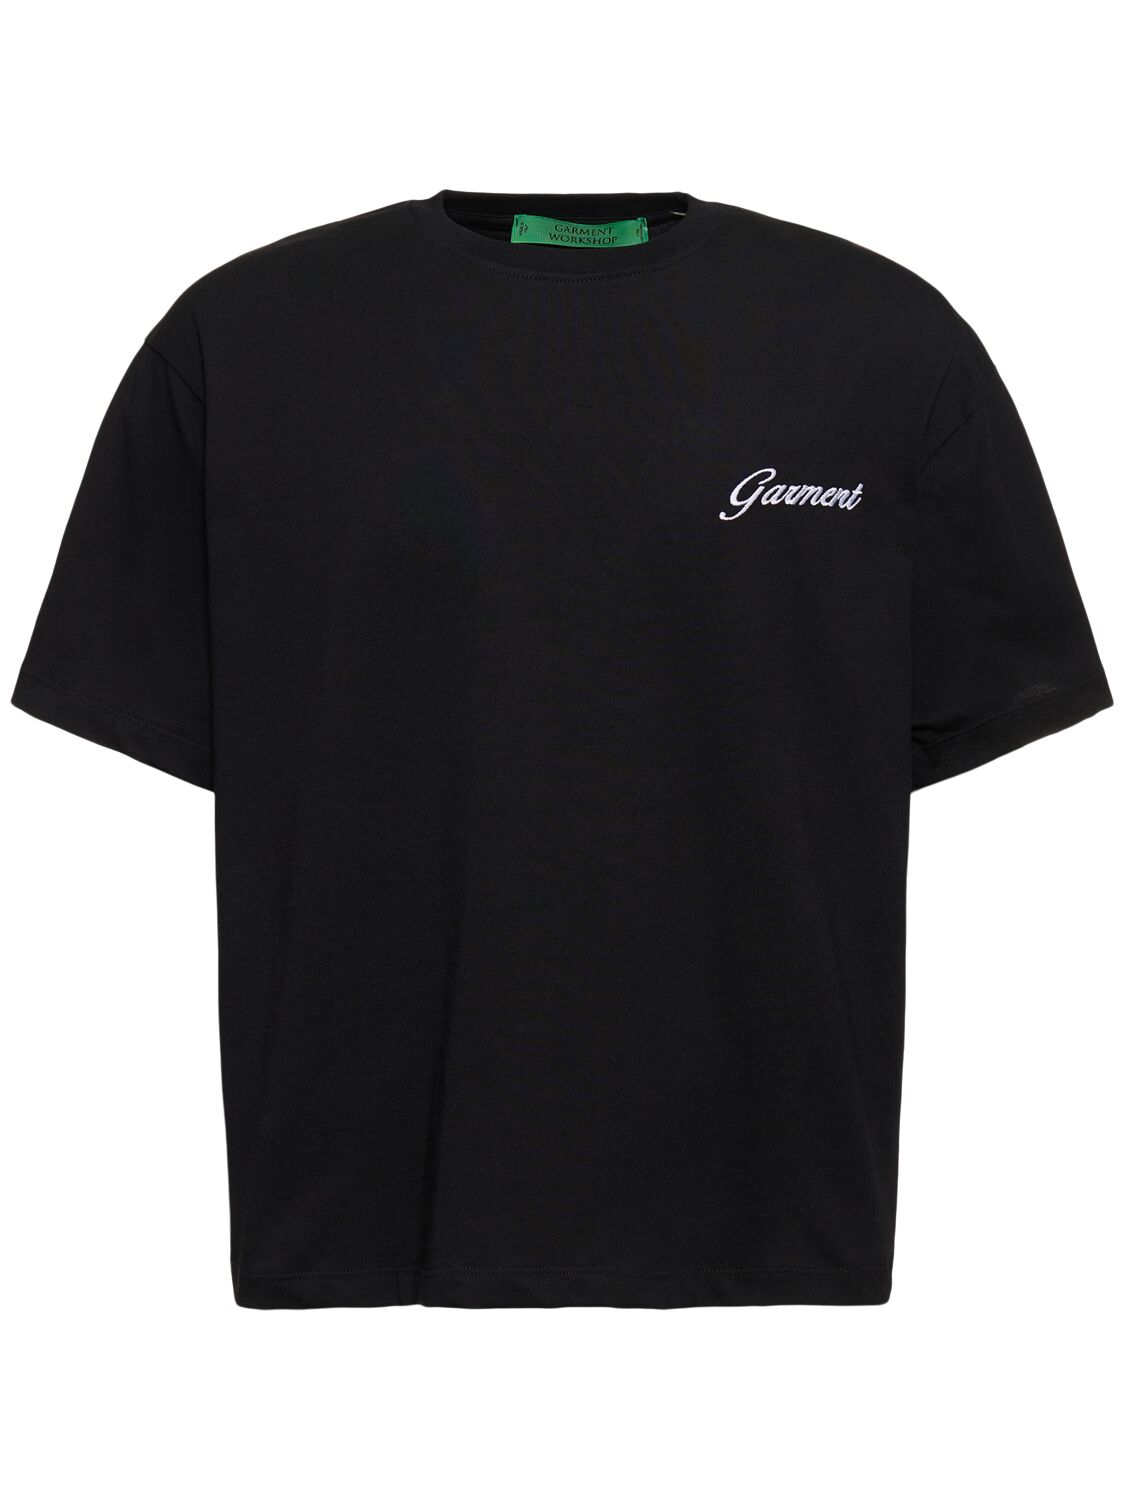 Image of If You Know You Know Embroidered T-shirt